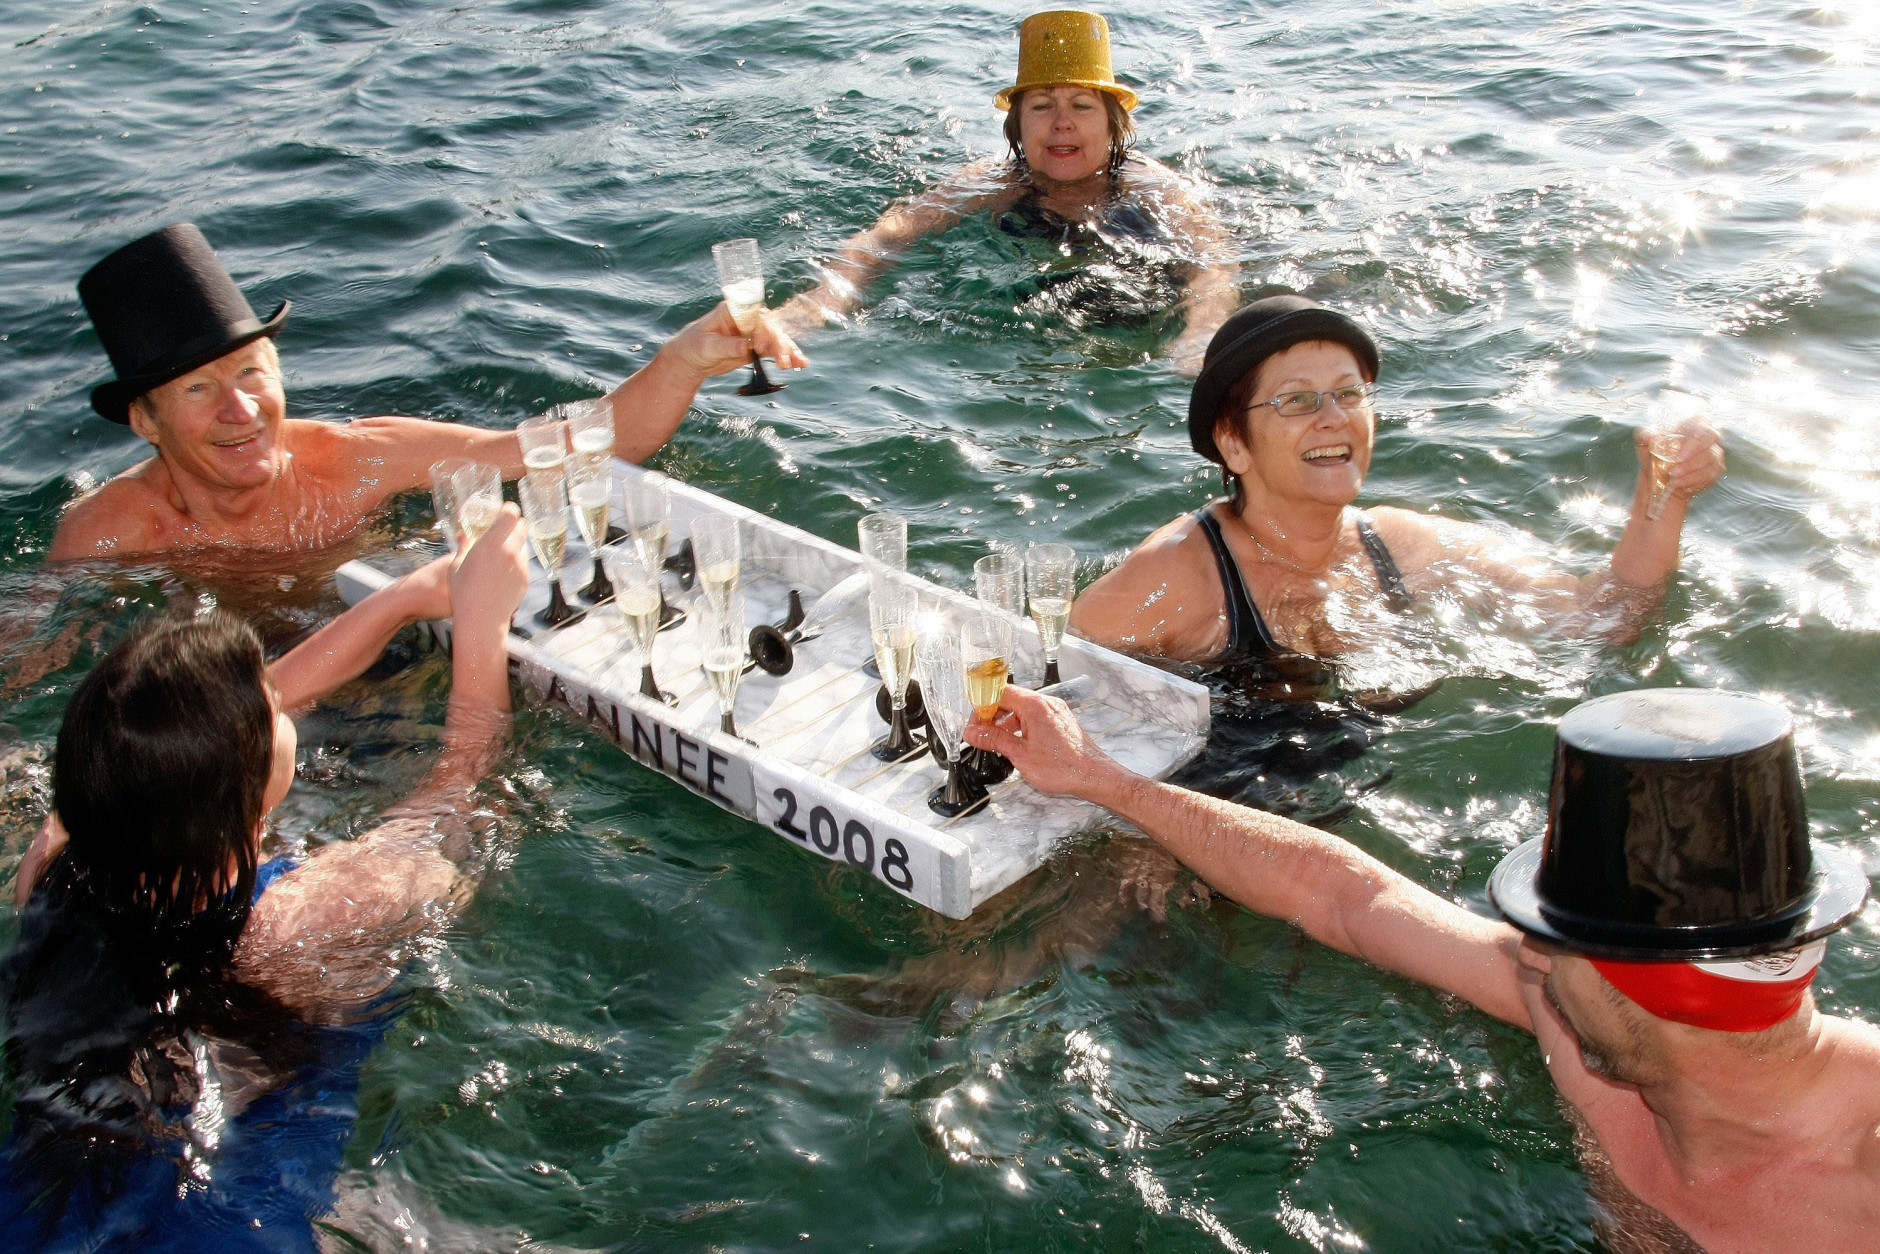 People in fancy costumes carry glasses of champagne while swimming in the chilly water during the annual swim in Lake Geneva, on New Year's day, Tuesday, 1 January 2008. (KEYSTONE/Dominic Favre)